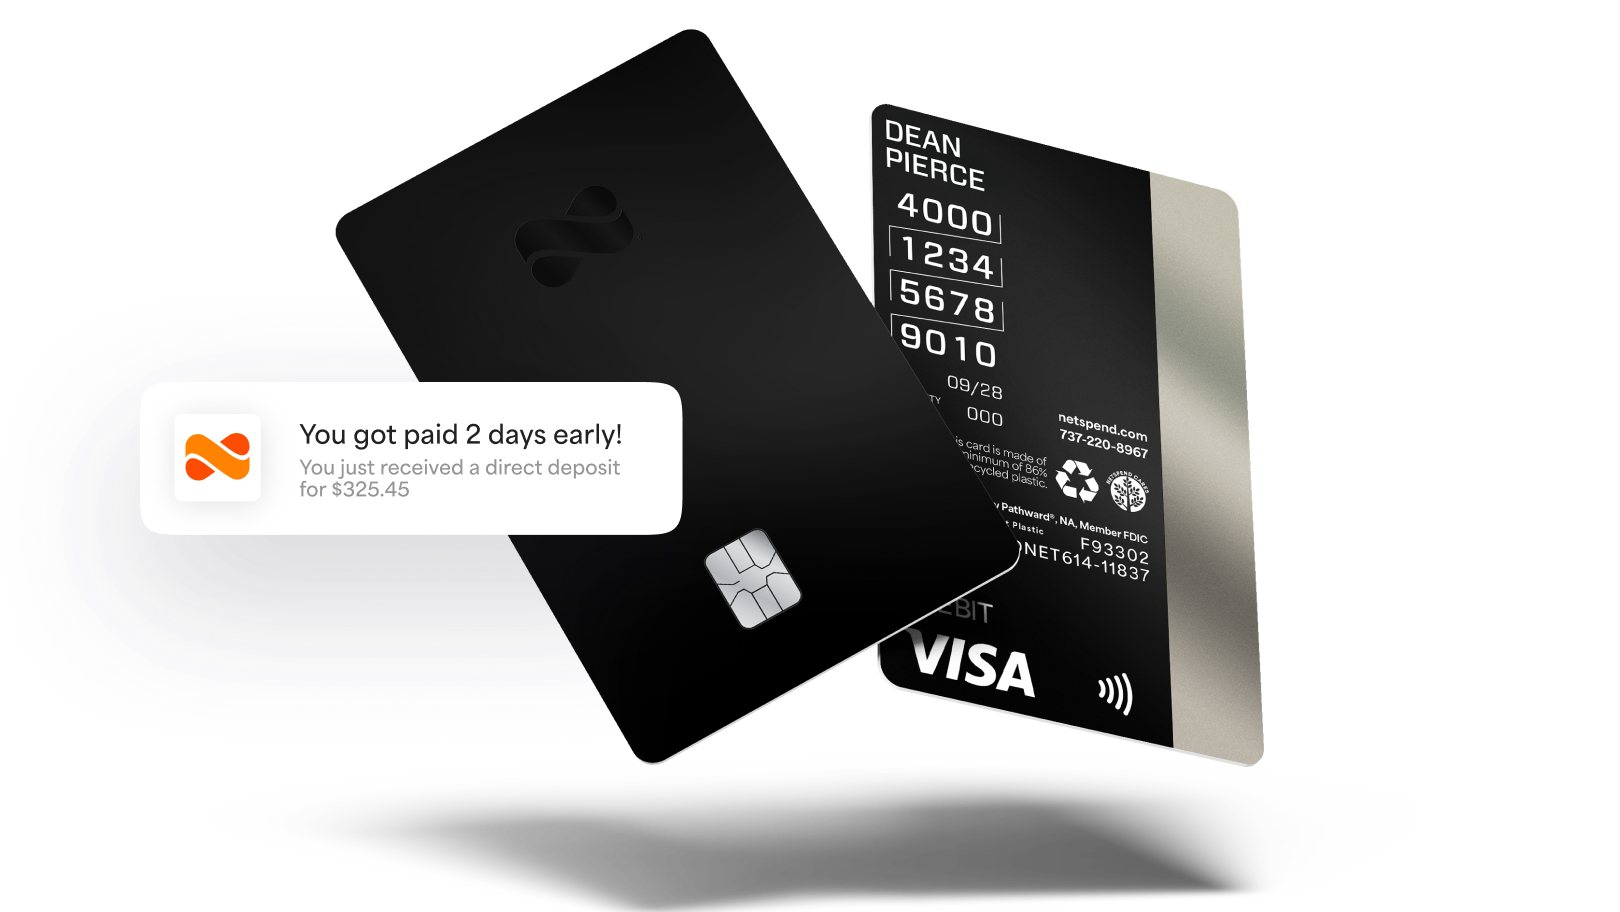 Netspend black debit card with a notification of being payed 2 days early